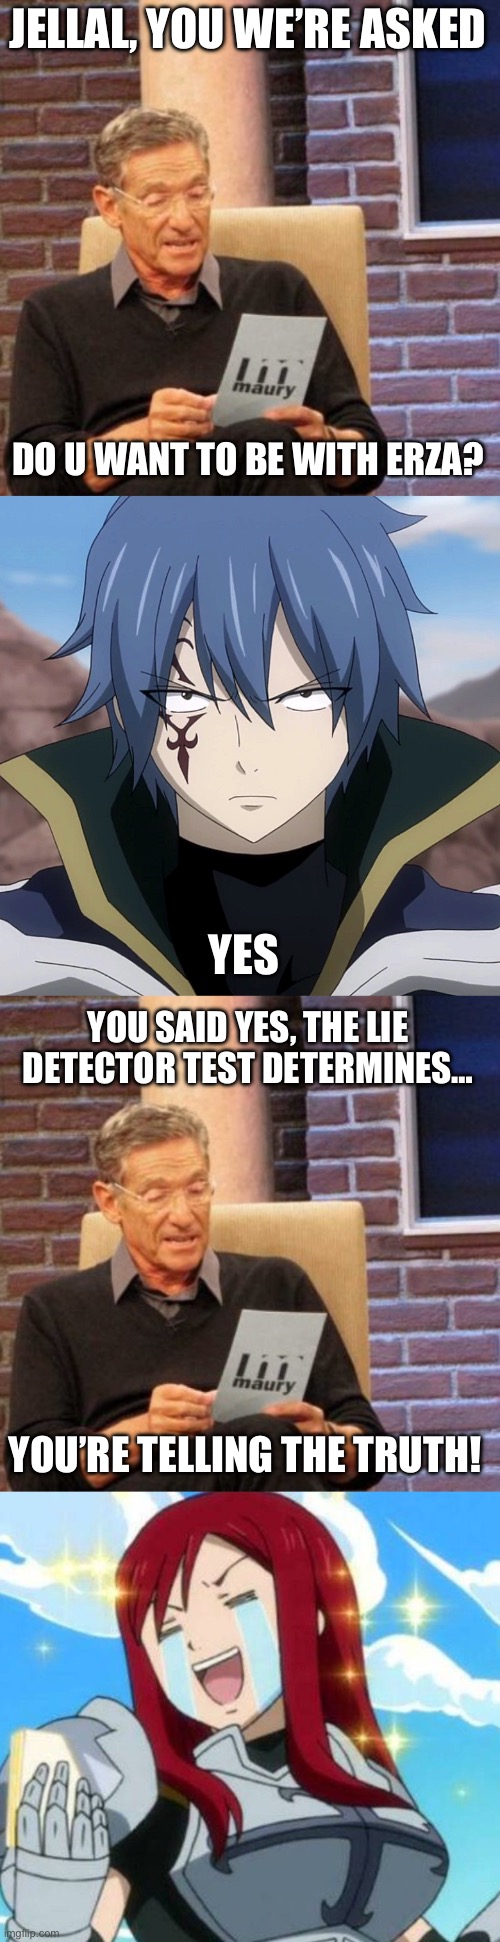 Maury Lie Detector, Does Jellal Want to be with Erza? | JELLAL, YOU WE’RE ASKED; DO U WANT TO BE WITH ERZA? YES; YOU SAID YES, THE LIE DETECTOR TEST DETERMINES…; YOU’RE TELLING THE TRUTH! | image tagged in memes,maury lie detector,fairy tail,jellal,erza scarlet,jerza | made w/ Imgflip meme maker